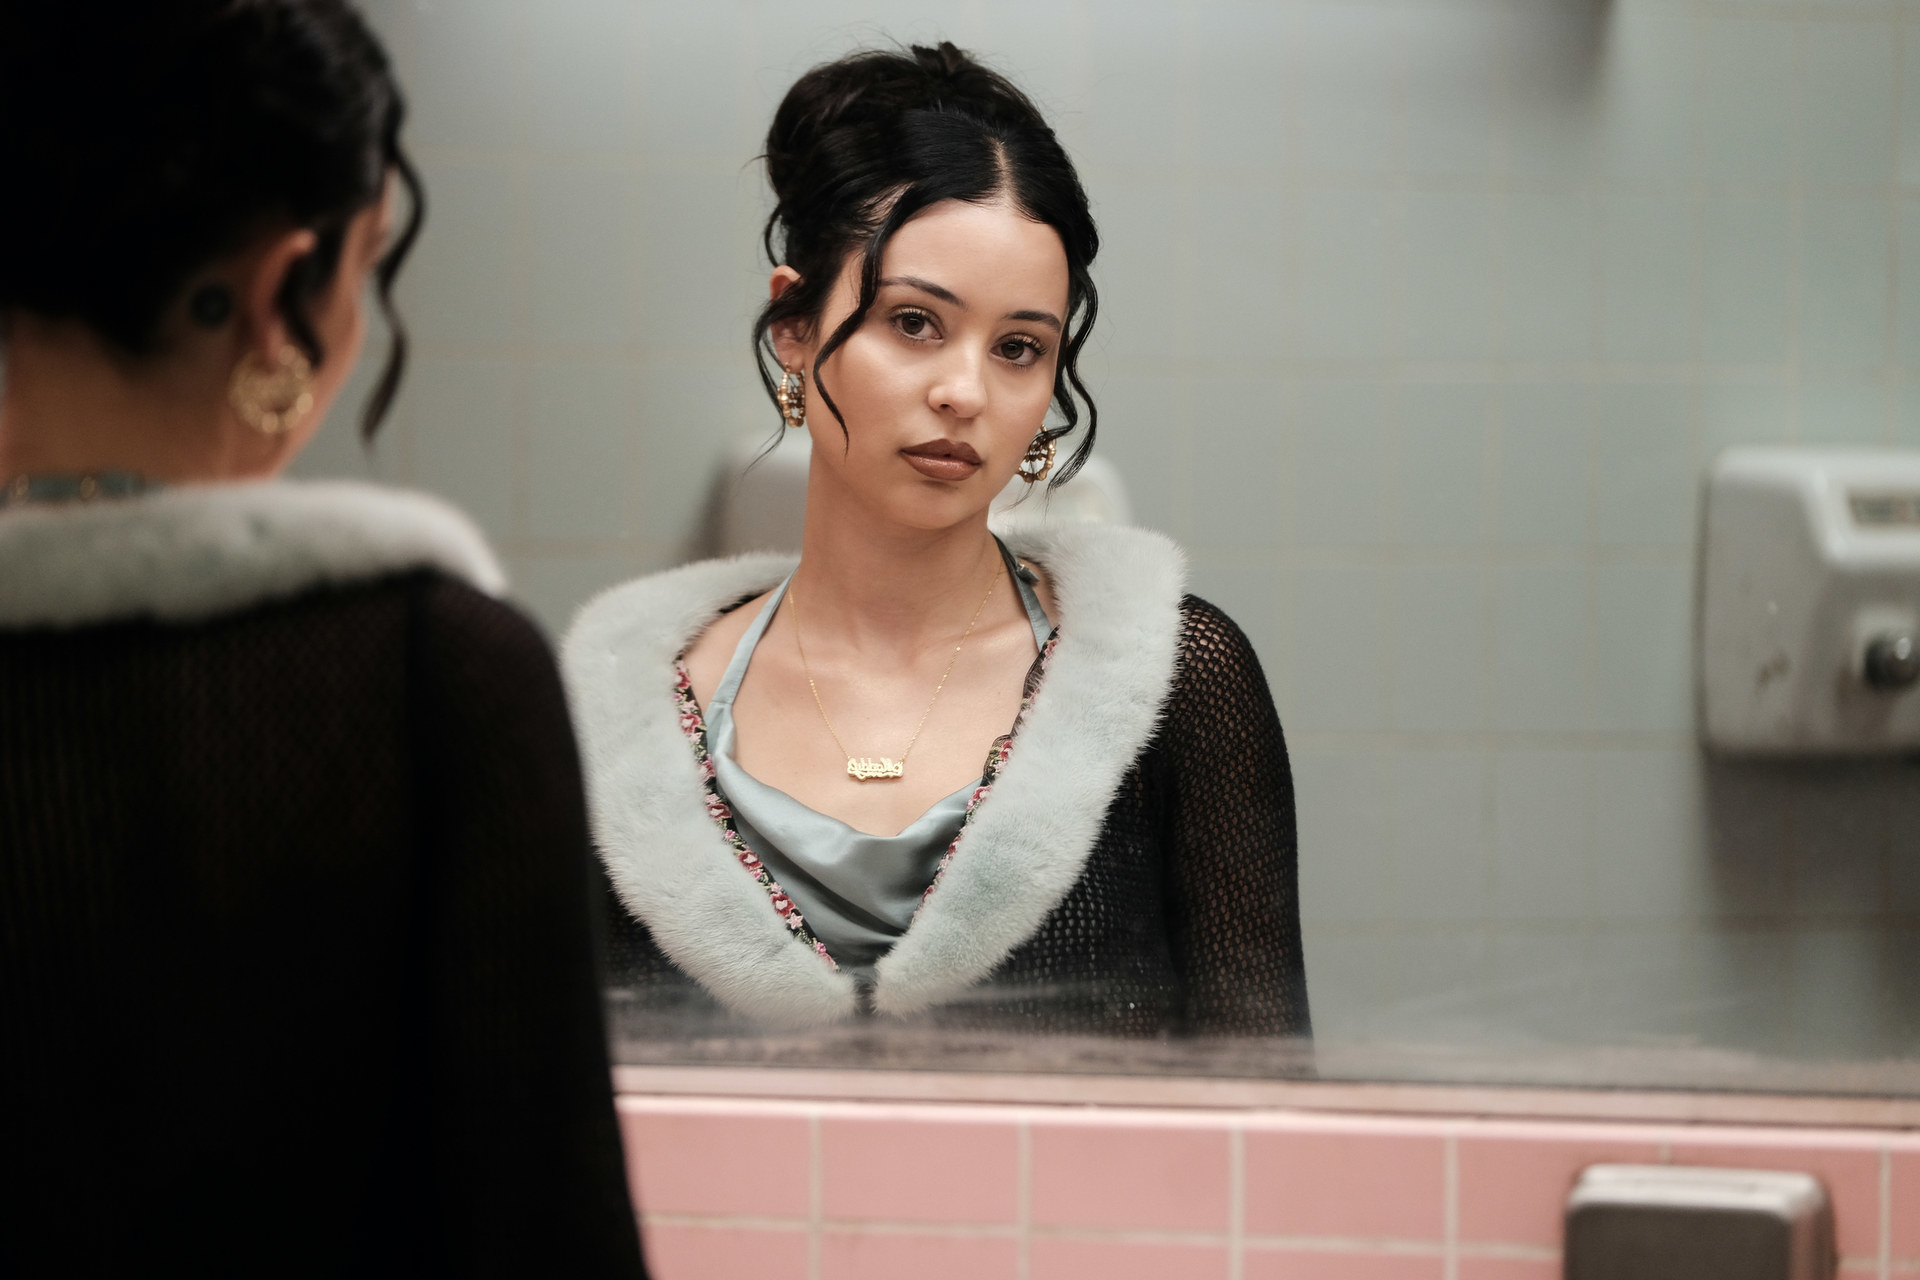 A teen girl with black hair looks at herself in a bathroom mirror